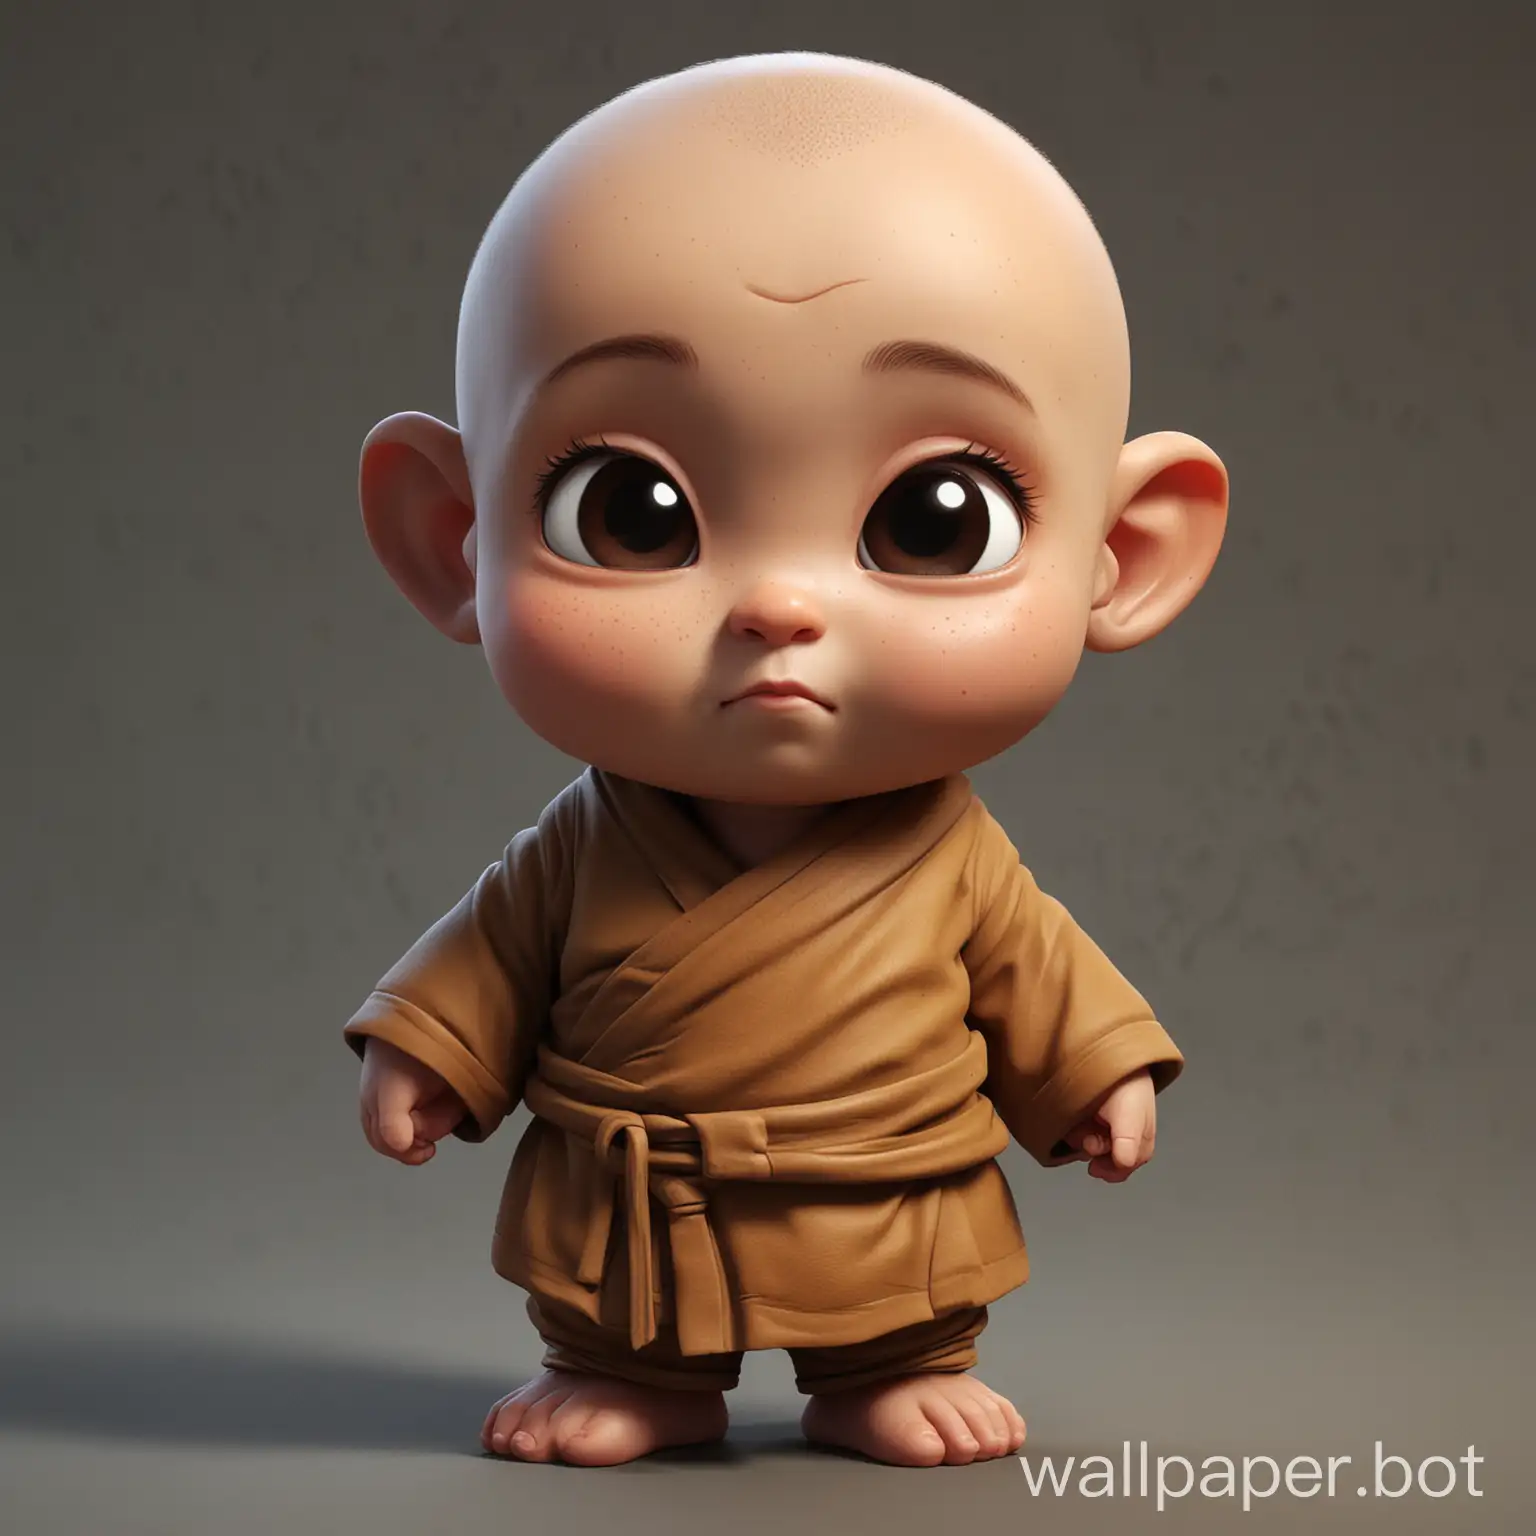 Cute-Cartoon-Baby-Monk-Sculpture-3D-Reference-and-Blueprint